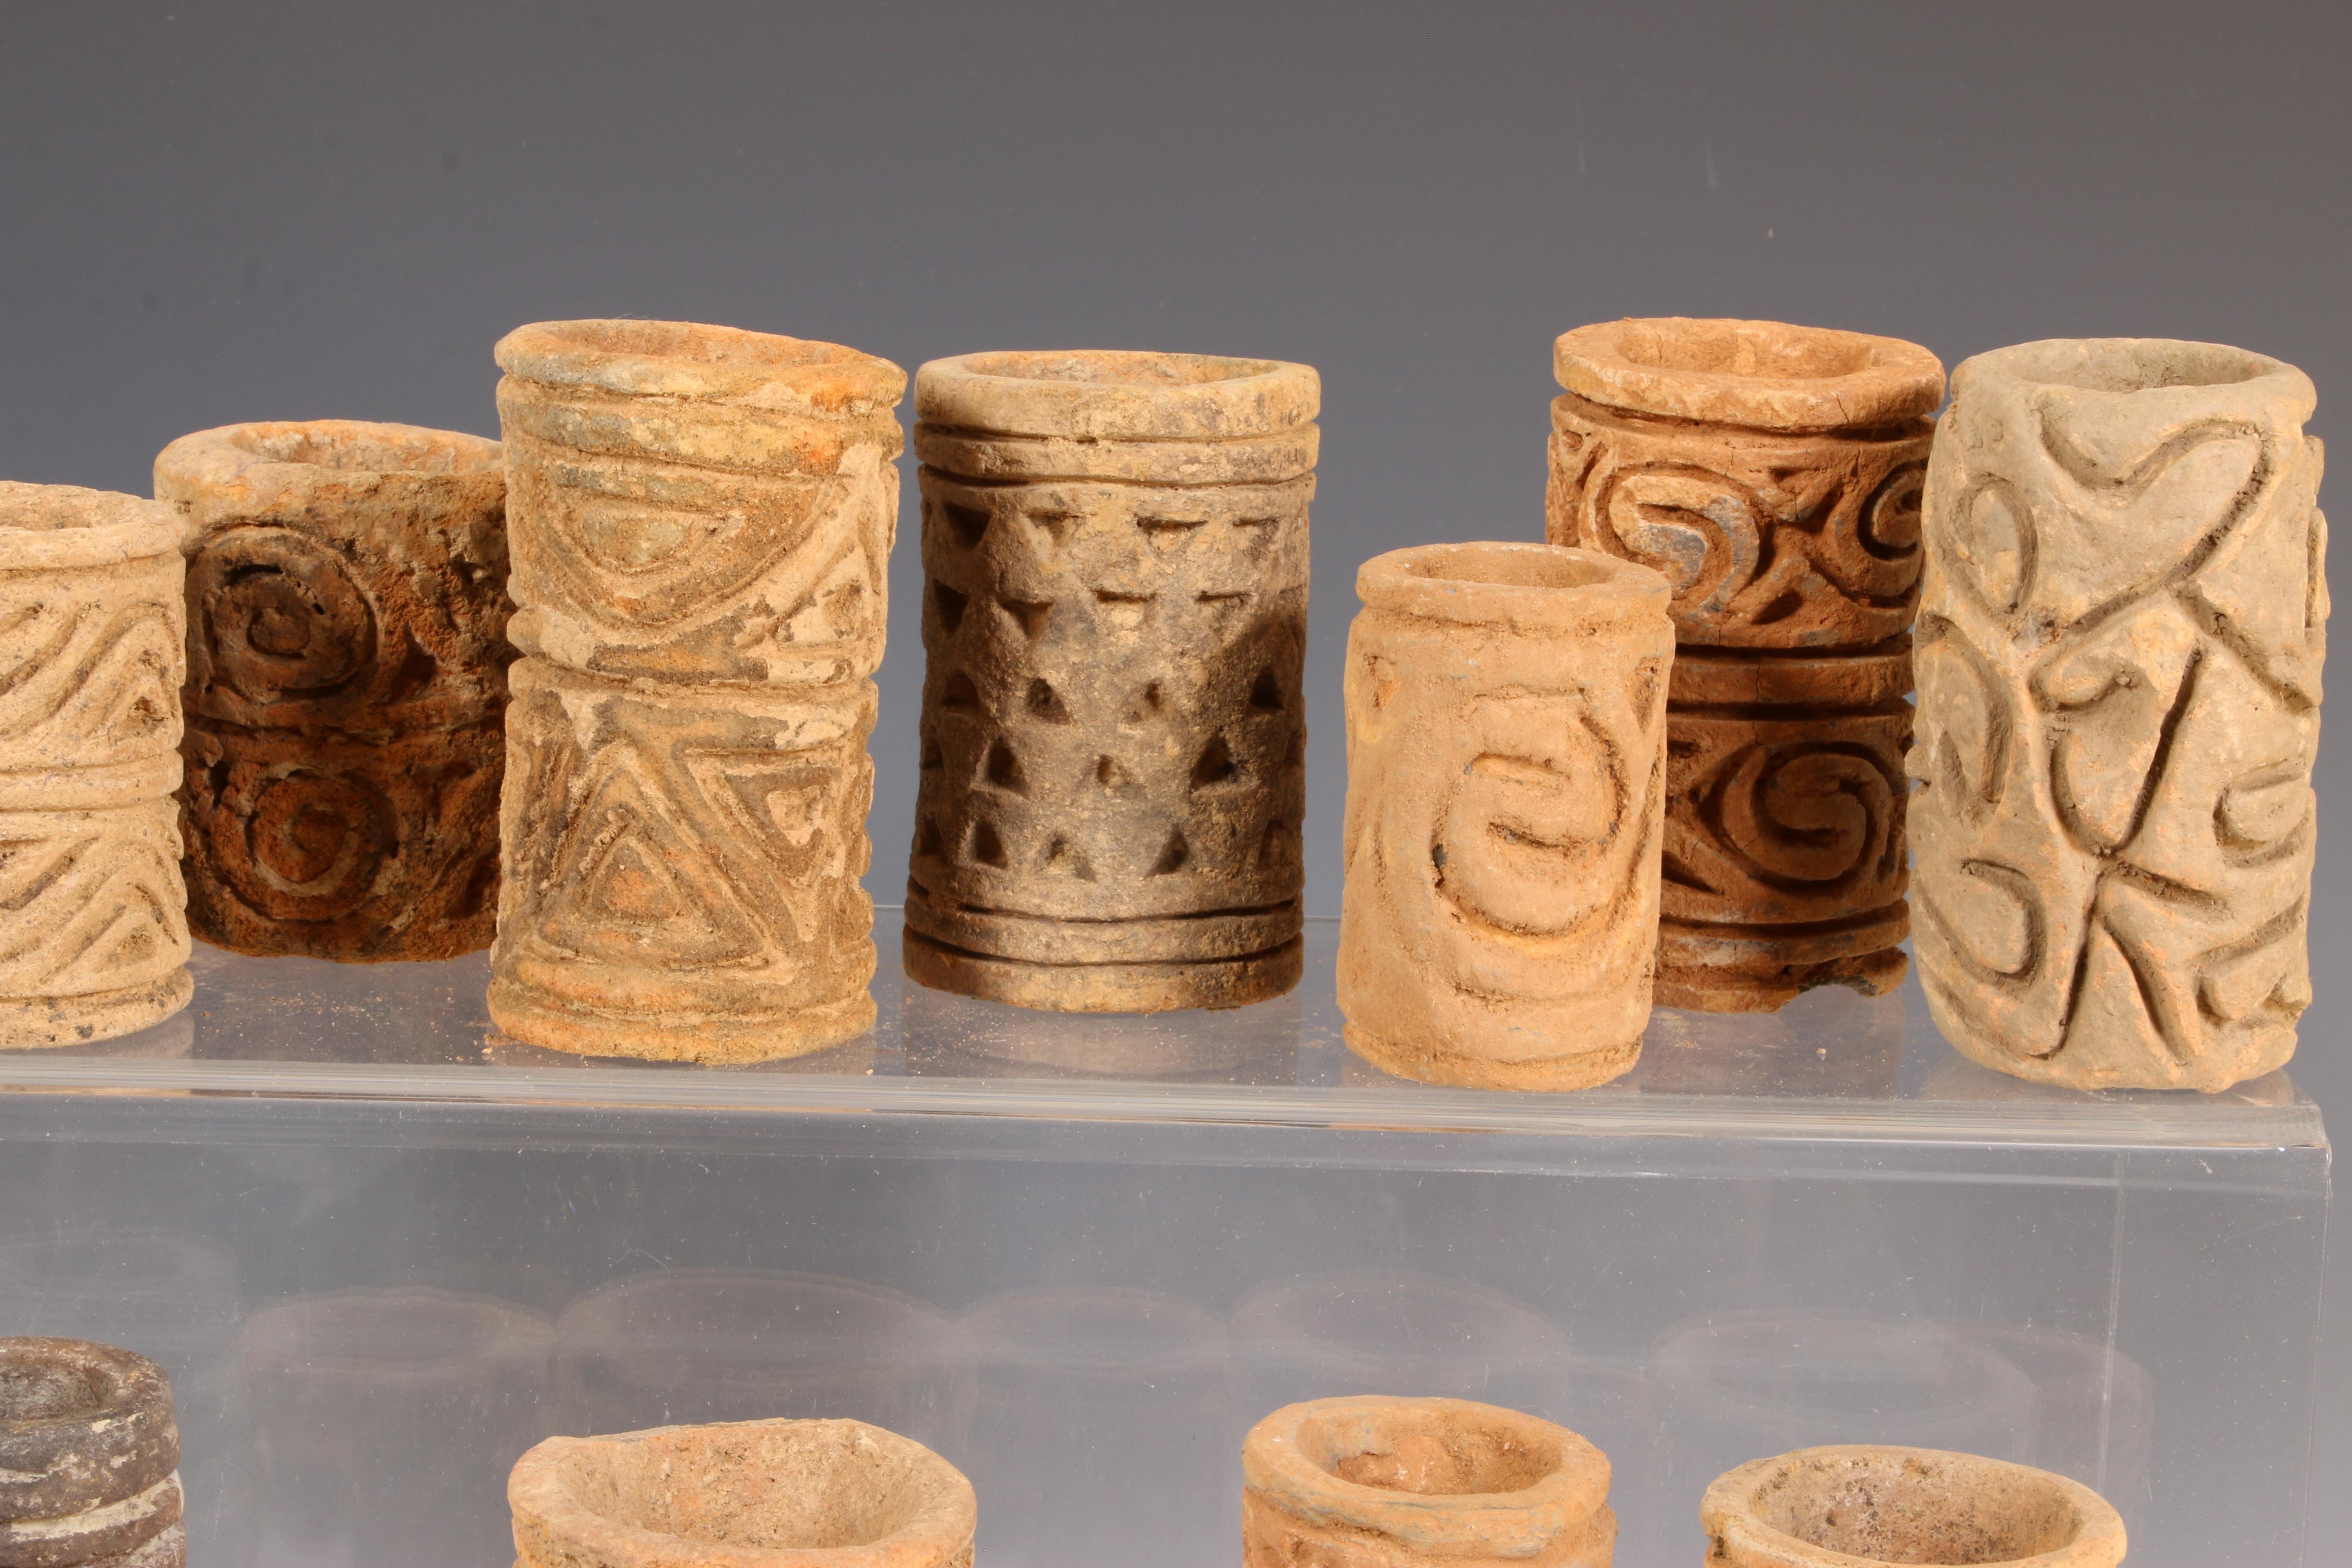 Colombia - Venezuela, Quimbaya, ca. 1300-1550, a collection of terracotta rol seals and stamps - Image 3 of 4